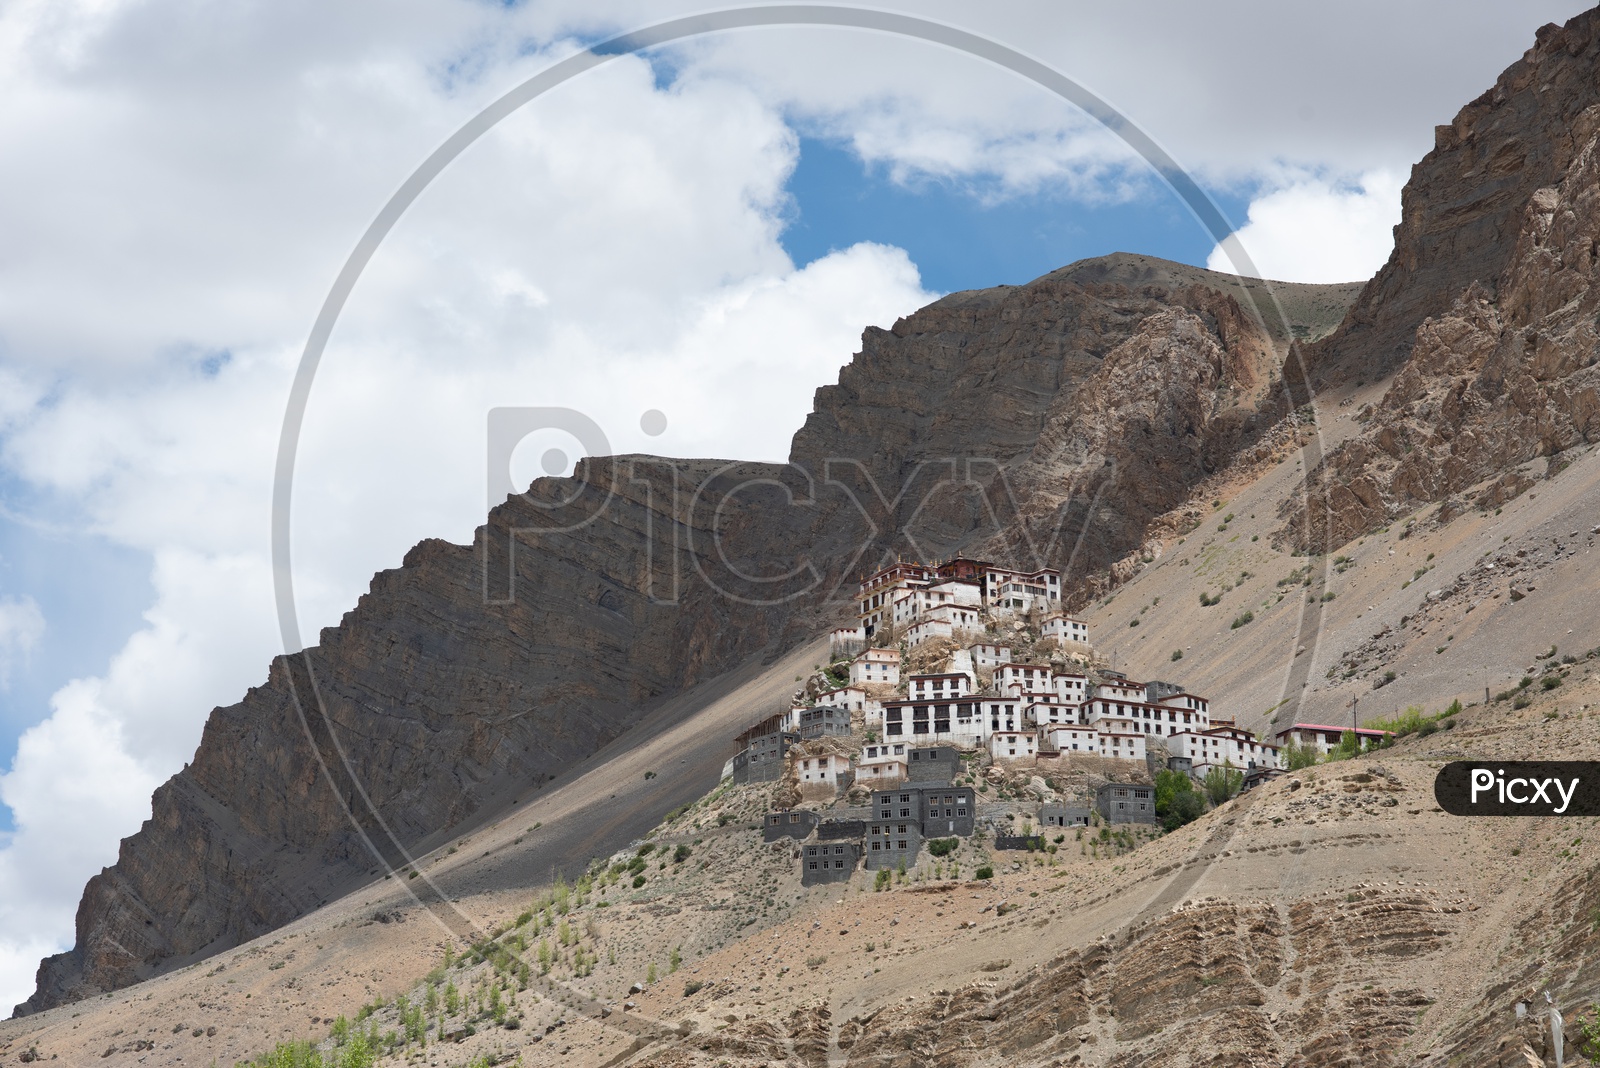 Beautiful Landscape of Mountains with Clouds and village, Spiti Valley